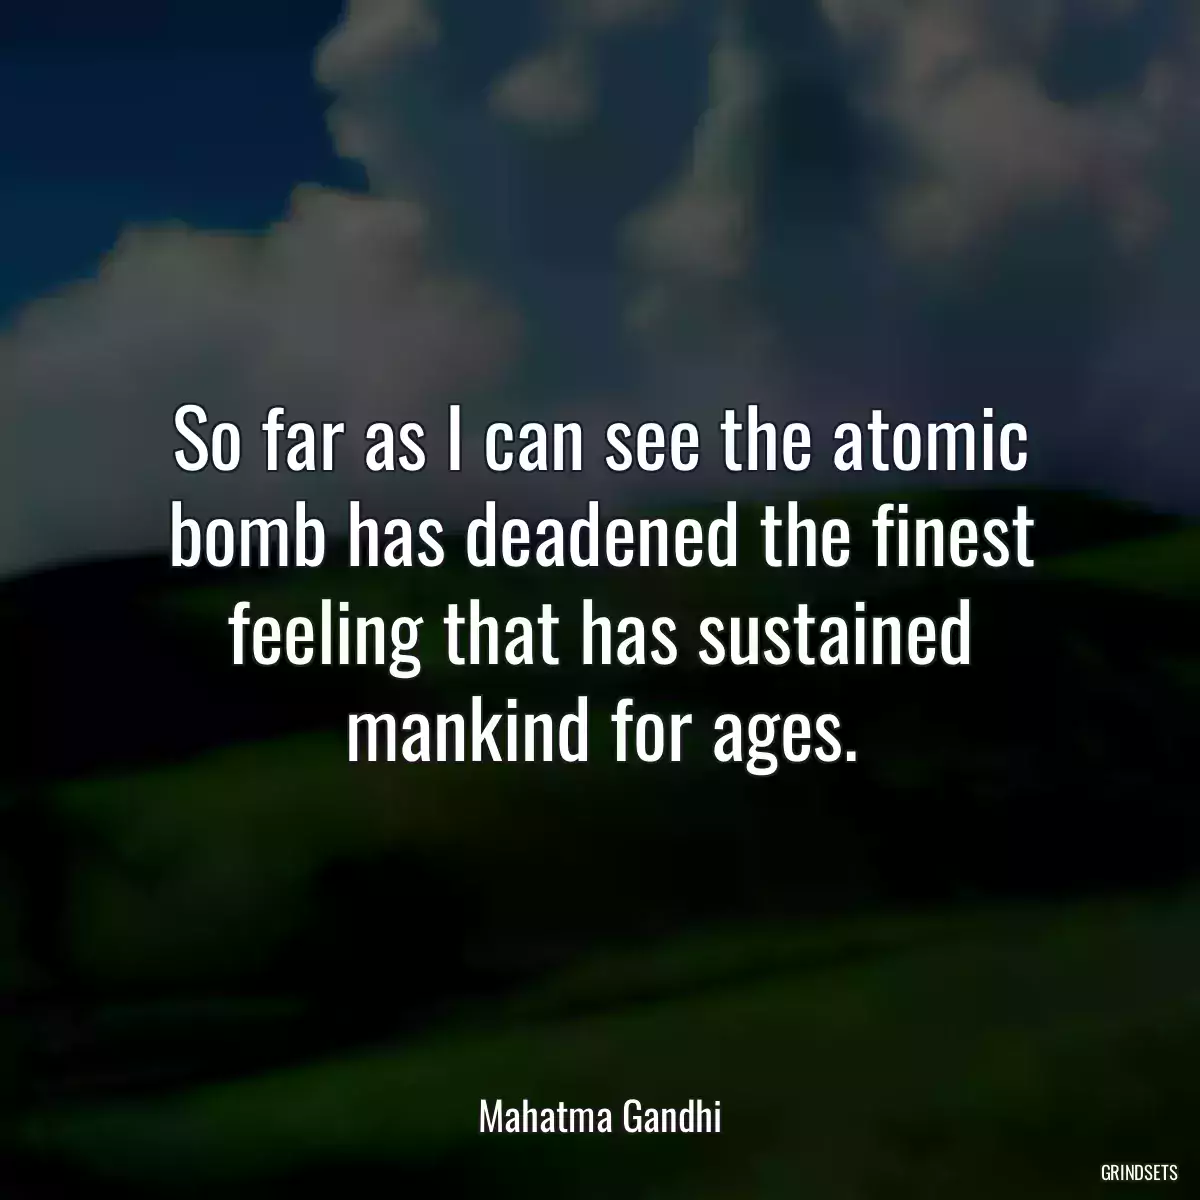 So far as I can see the atomic bomb has deadened the finest feeling that has sustained mankind for ages.